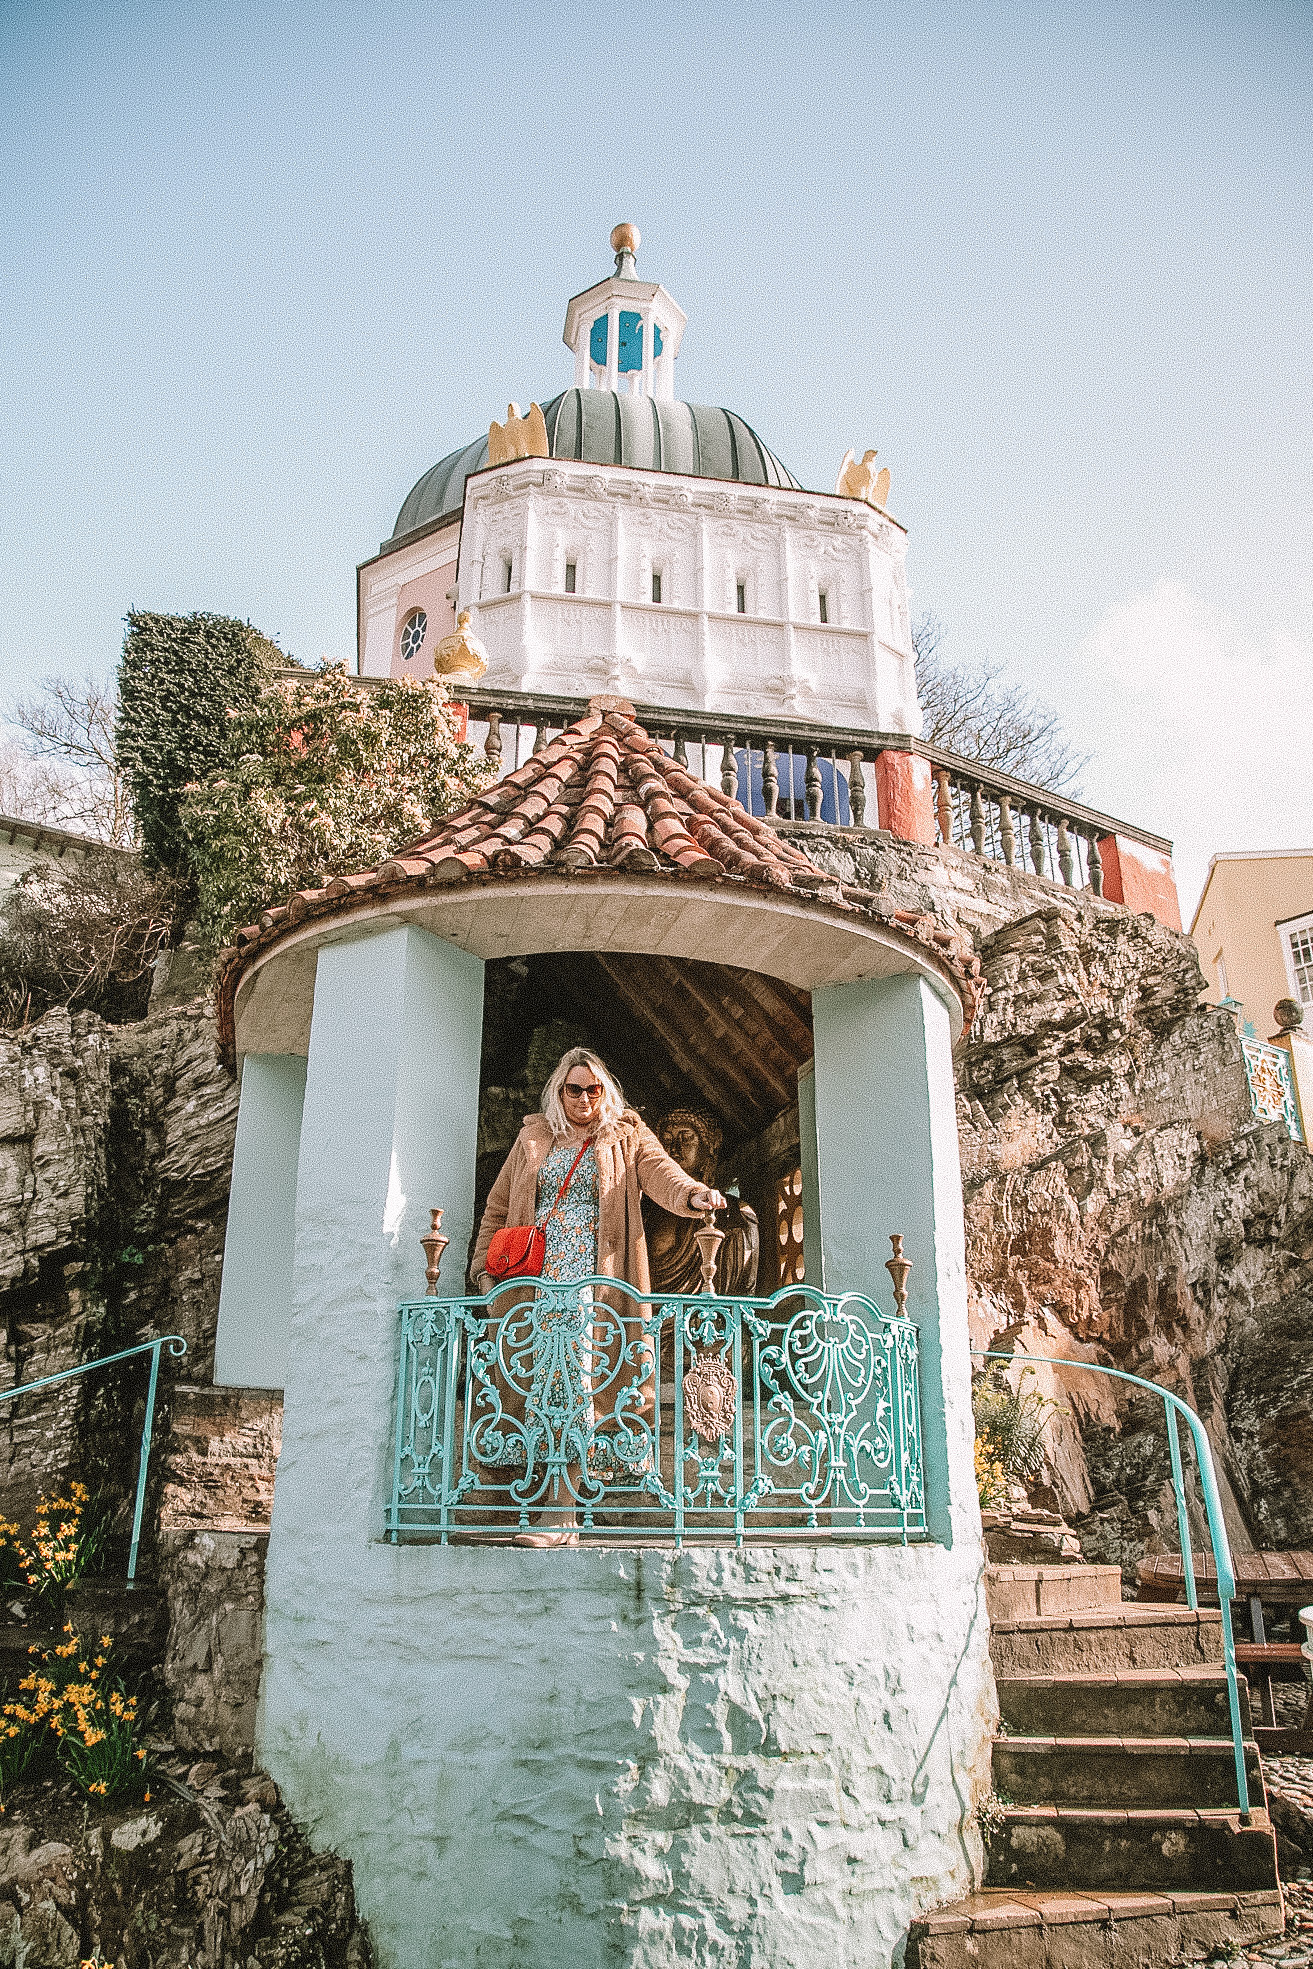 Lucy stood in a small stand in portmeirion